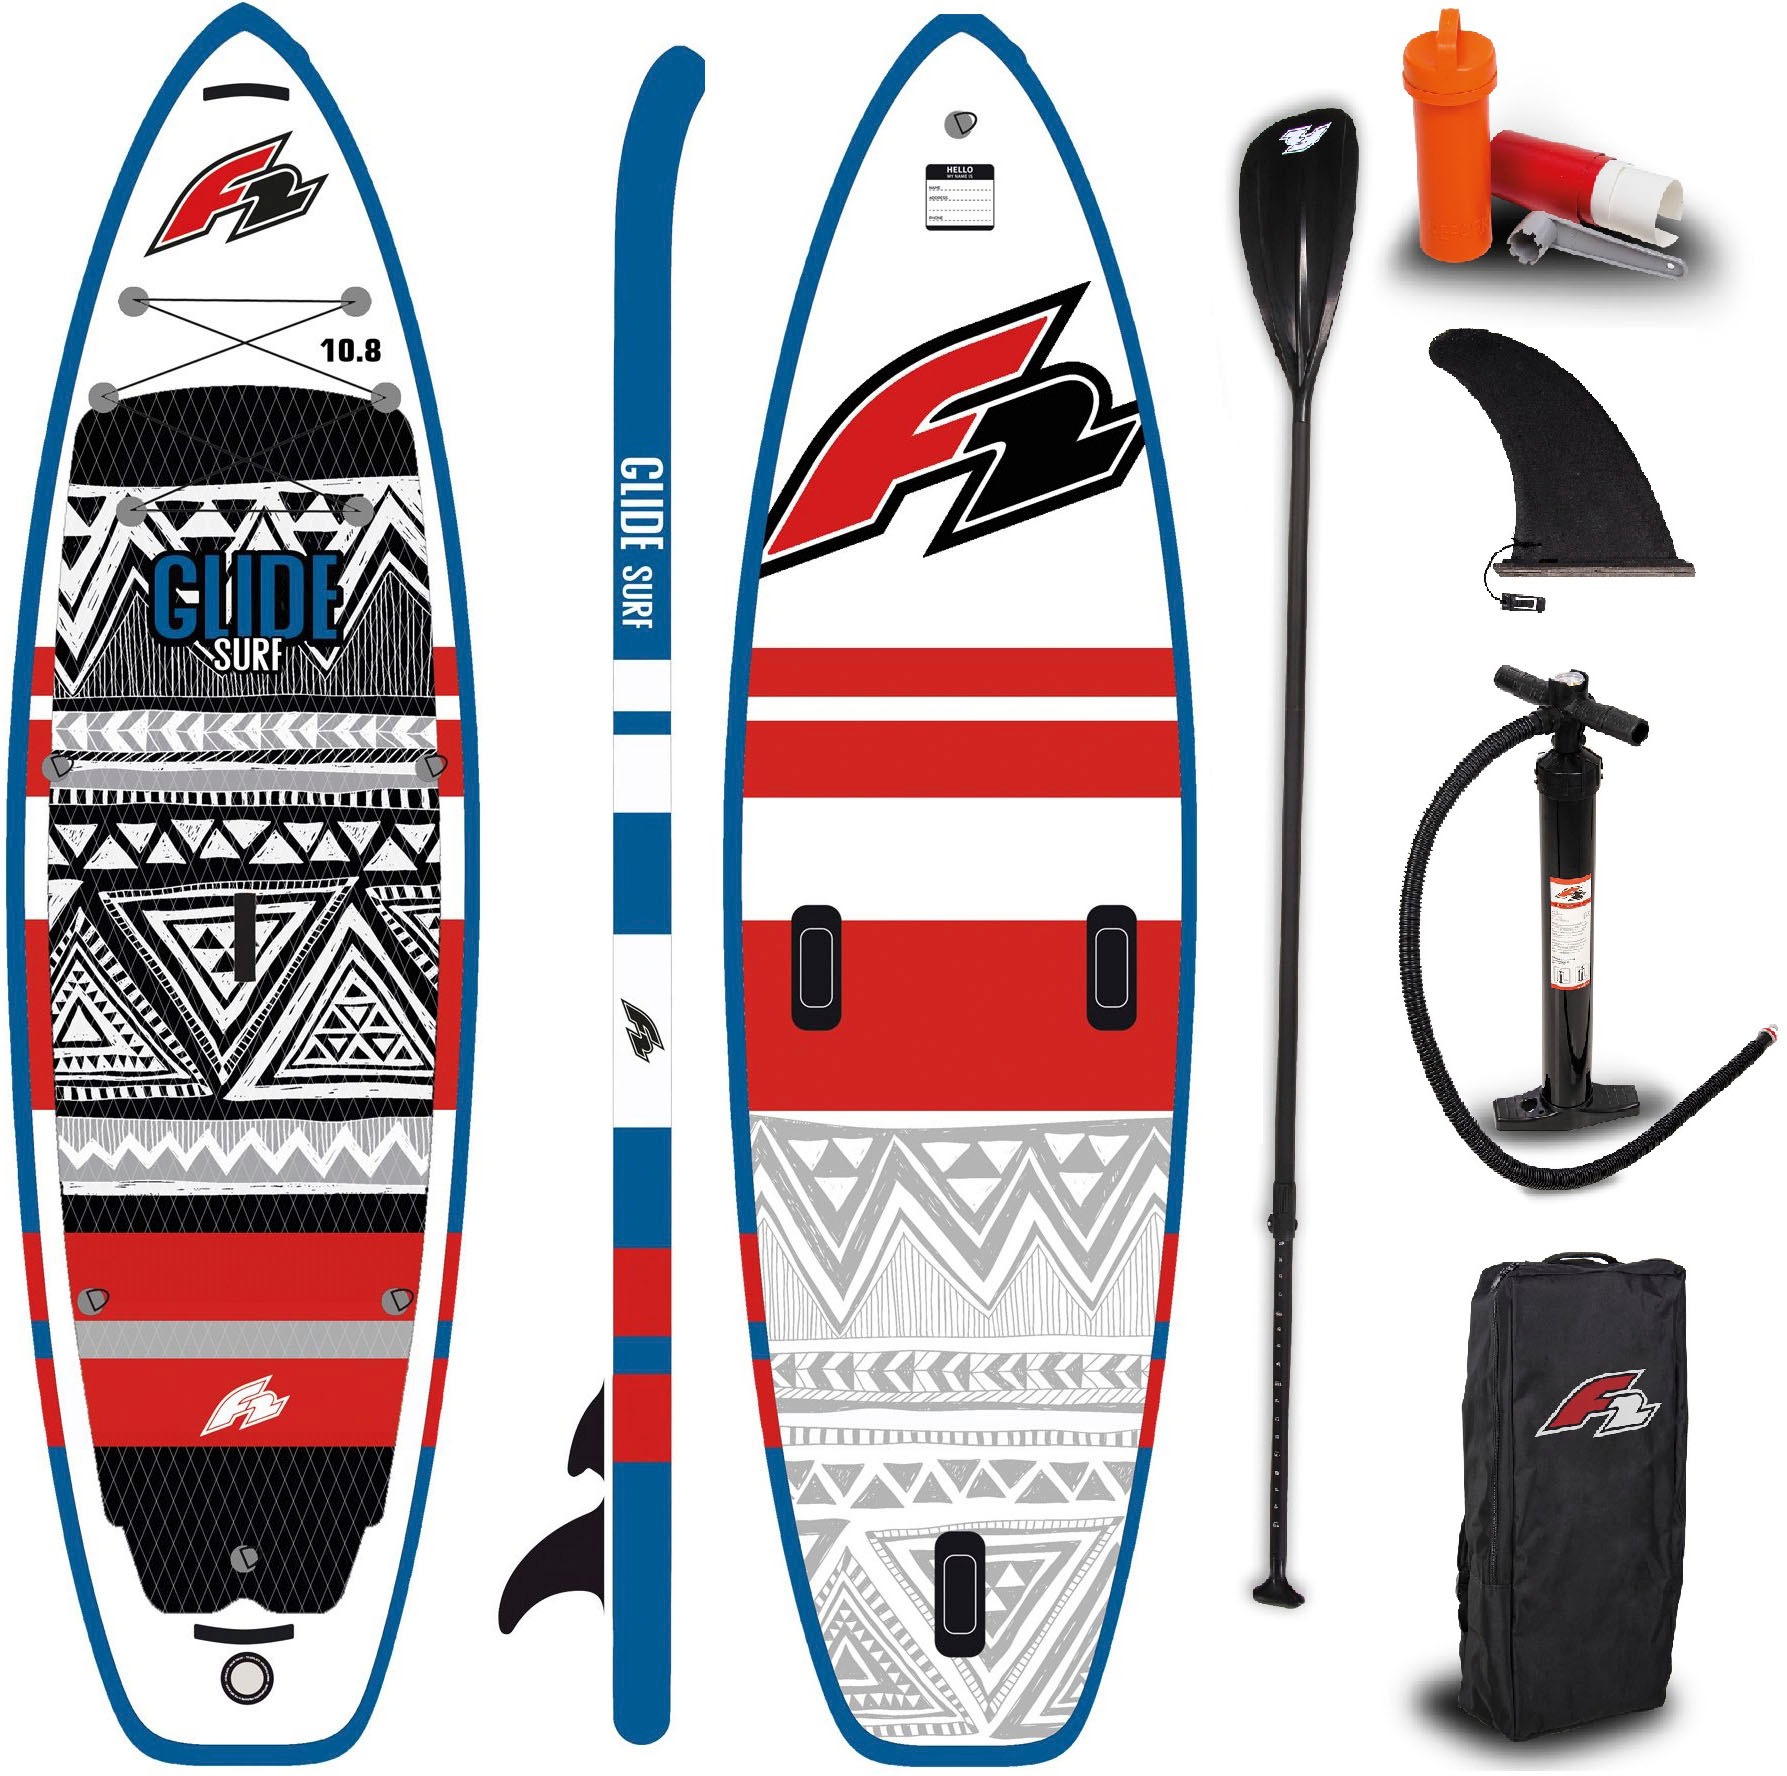 F2 Inflatable SUP-Board »Glide Surf bei 10,8 tlg.) 5 red«, (Packung